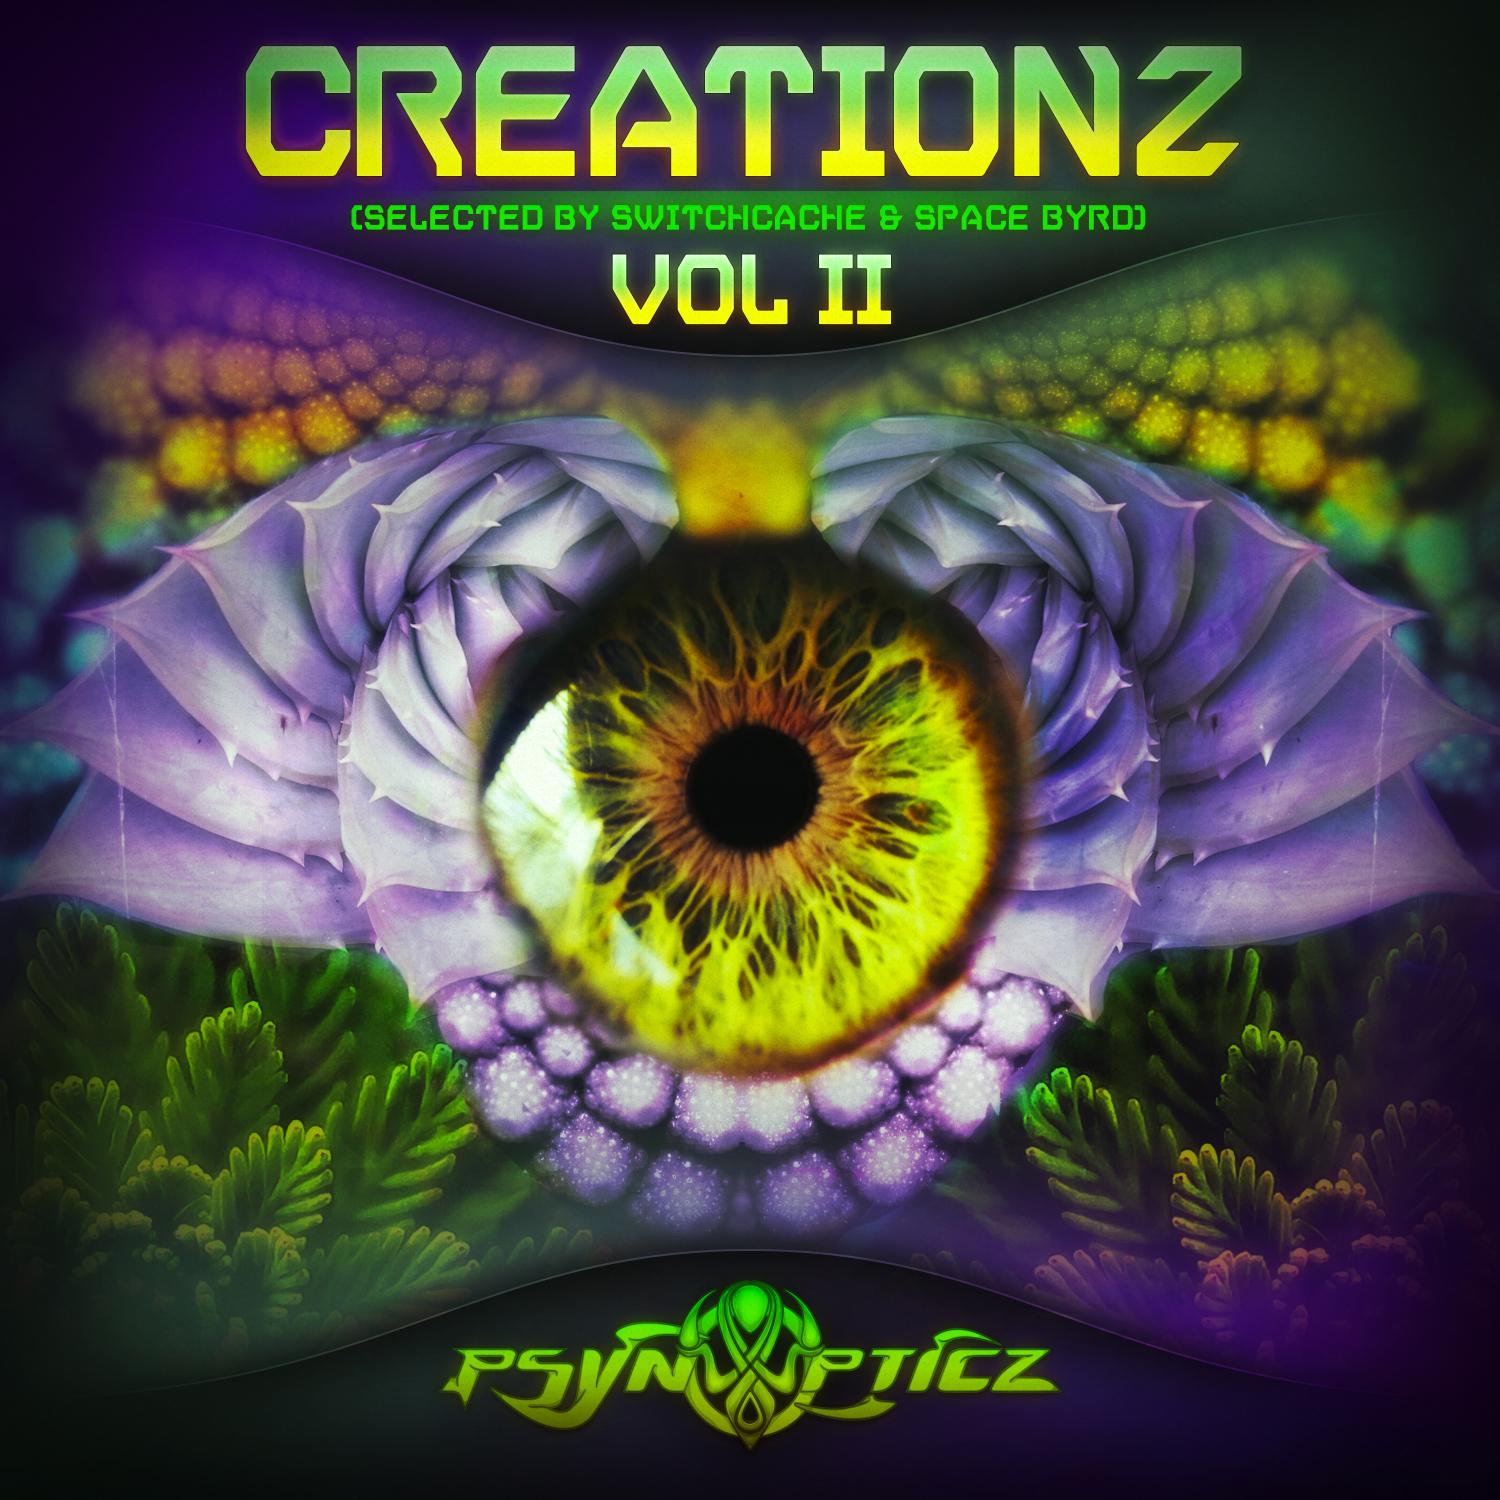 Постер альбома Creationz Vol II (Selected by Switchcache & Space Byrd)